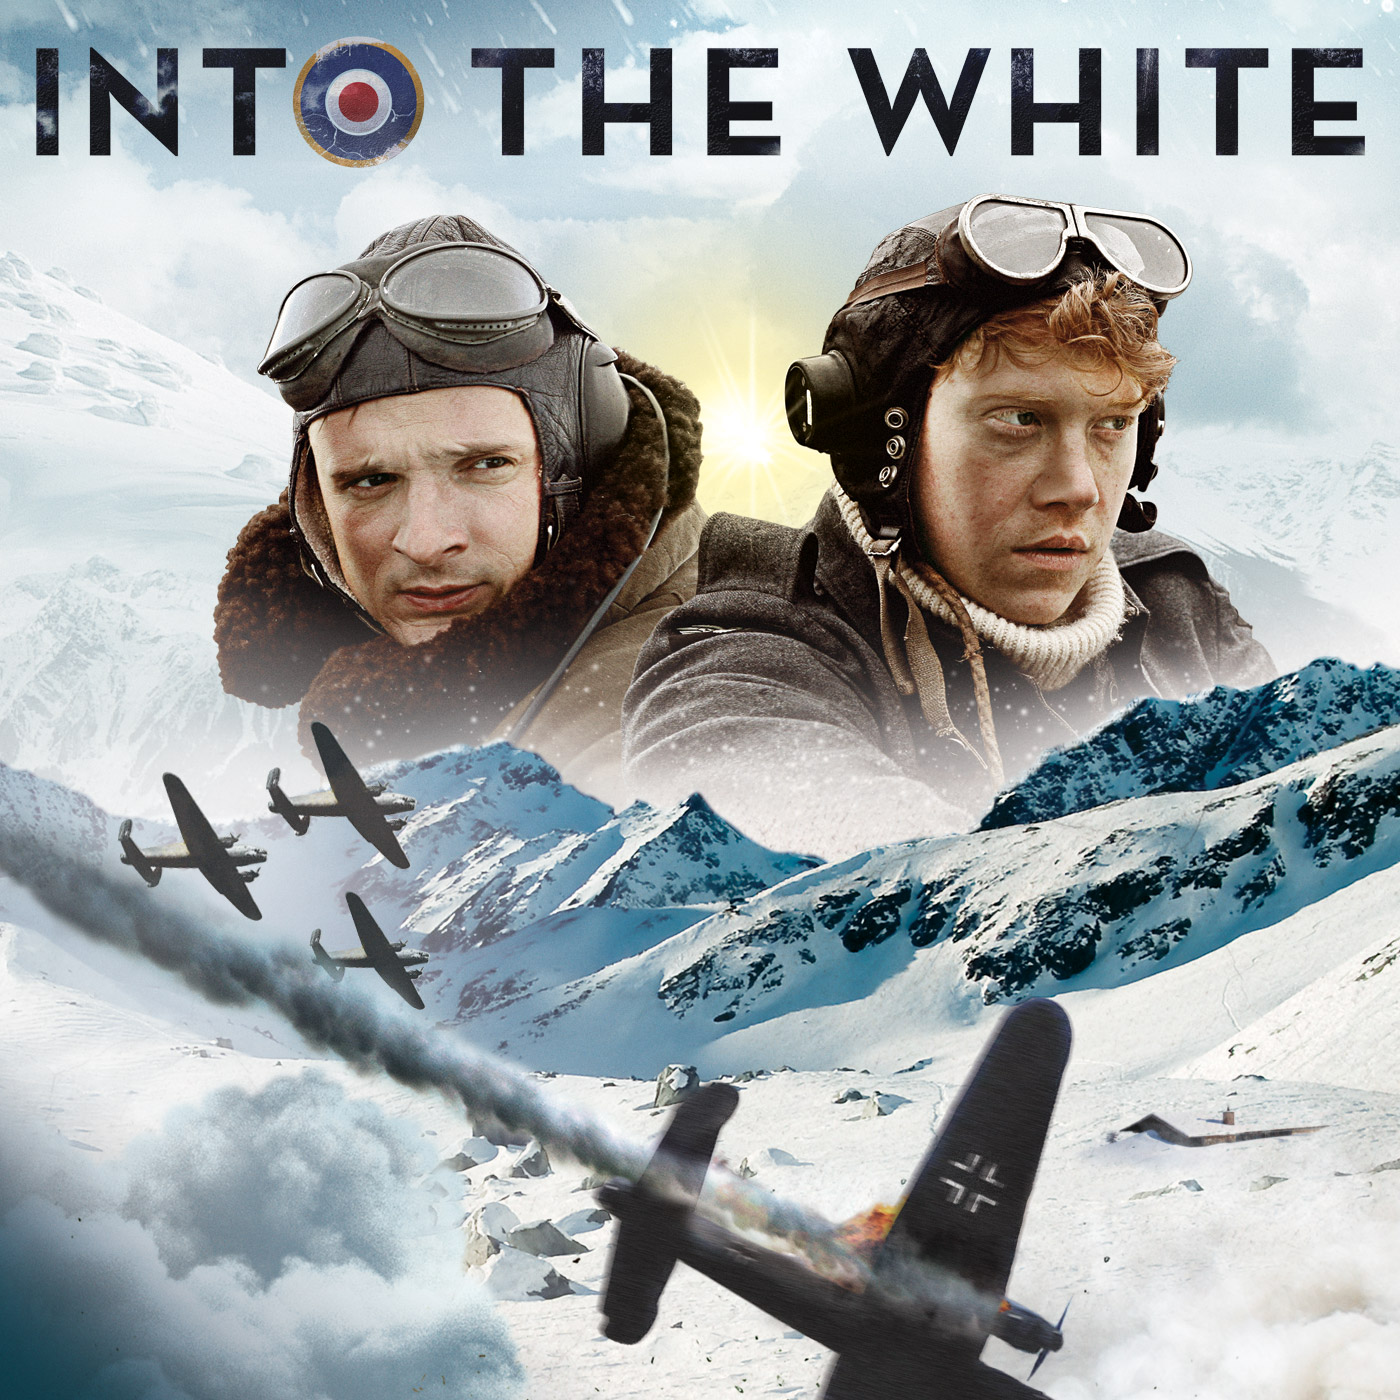 Into The White - Meet the Director and Actor